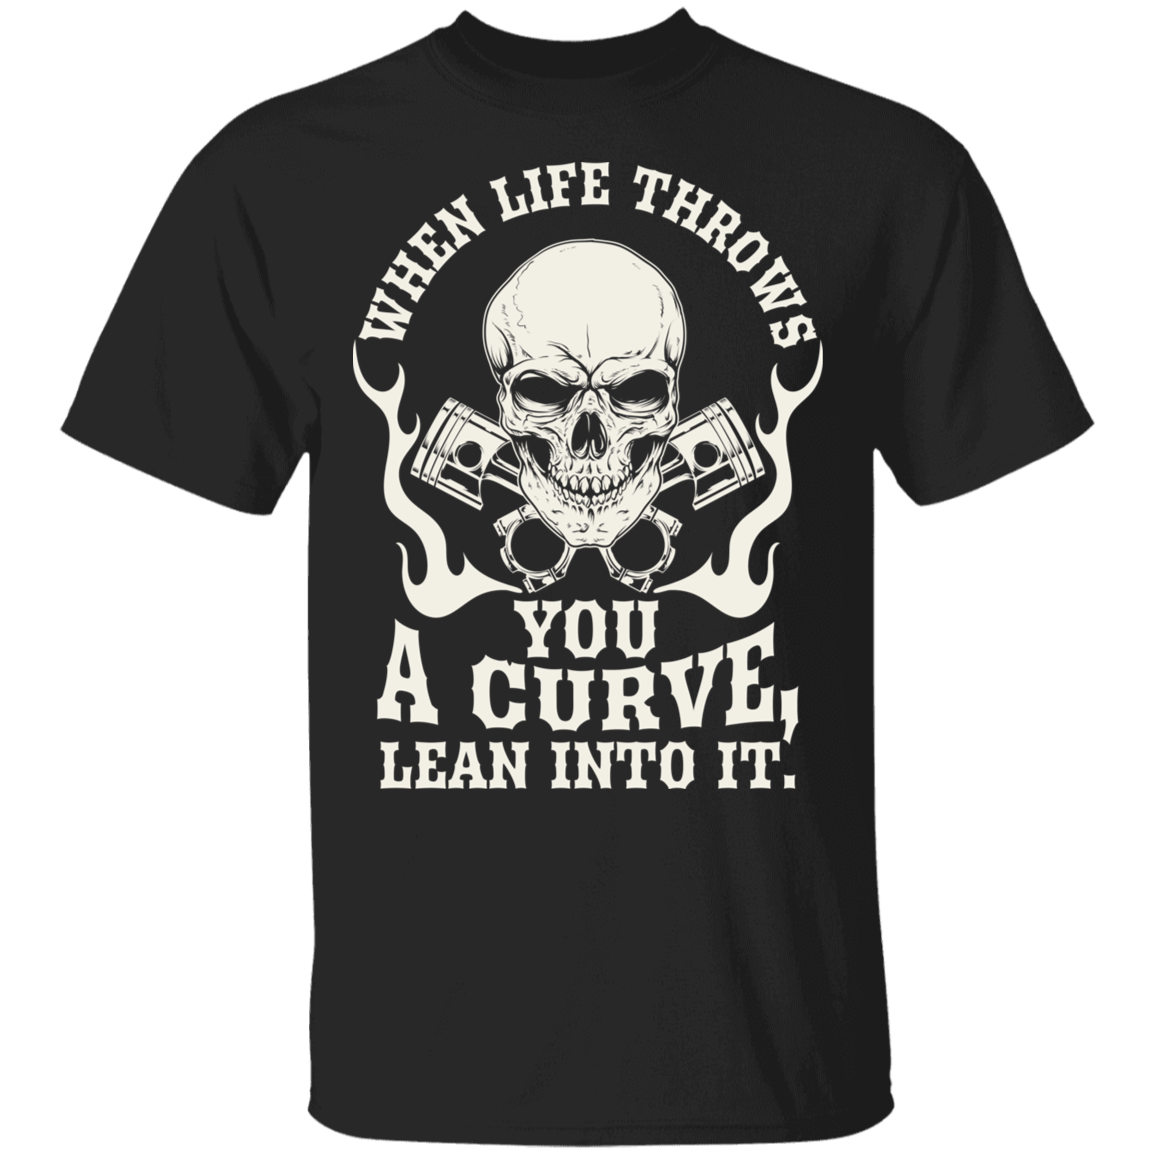 Apparel - When Life Throws You A Curve, Lean Into It Biker Shirt